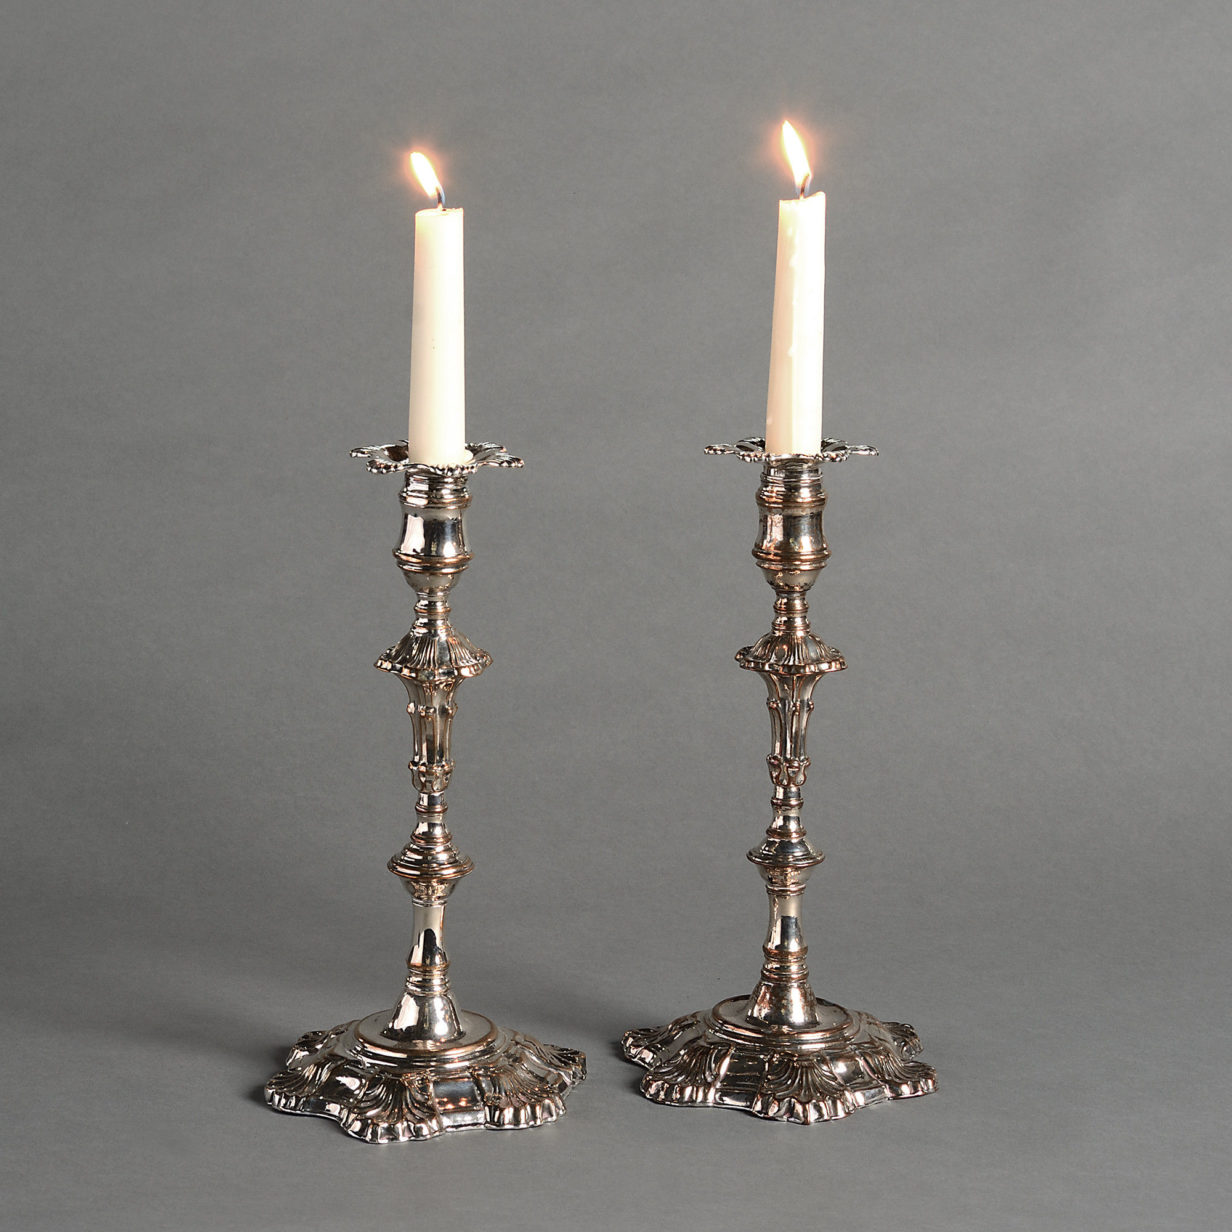 A pair of mid-18th century old sheffield plate candlesticks